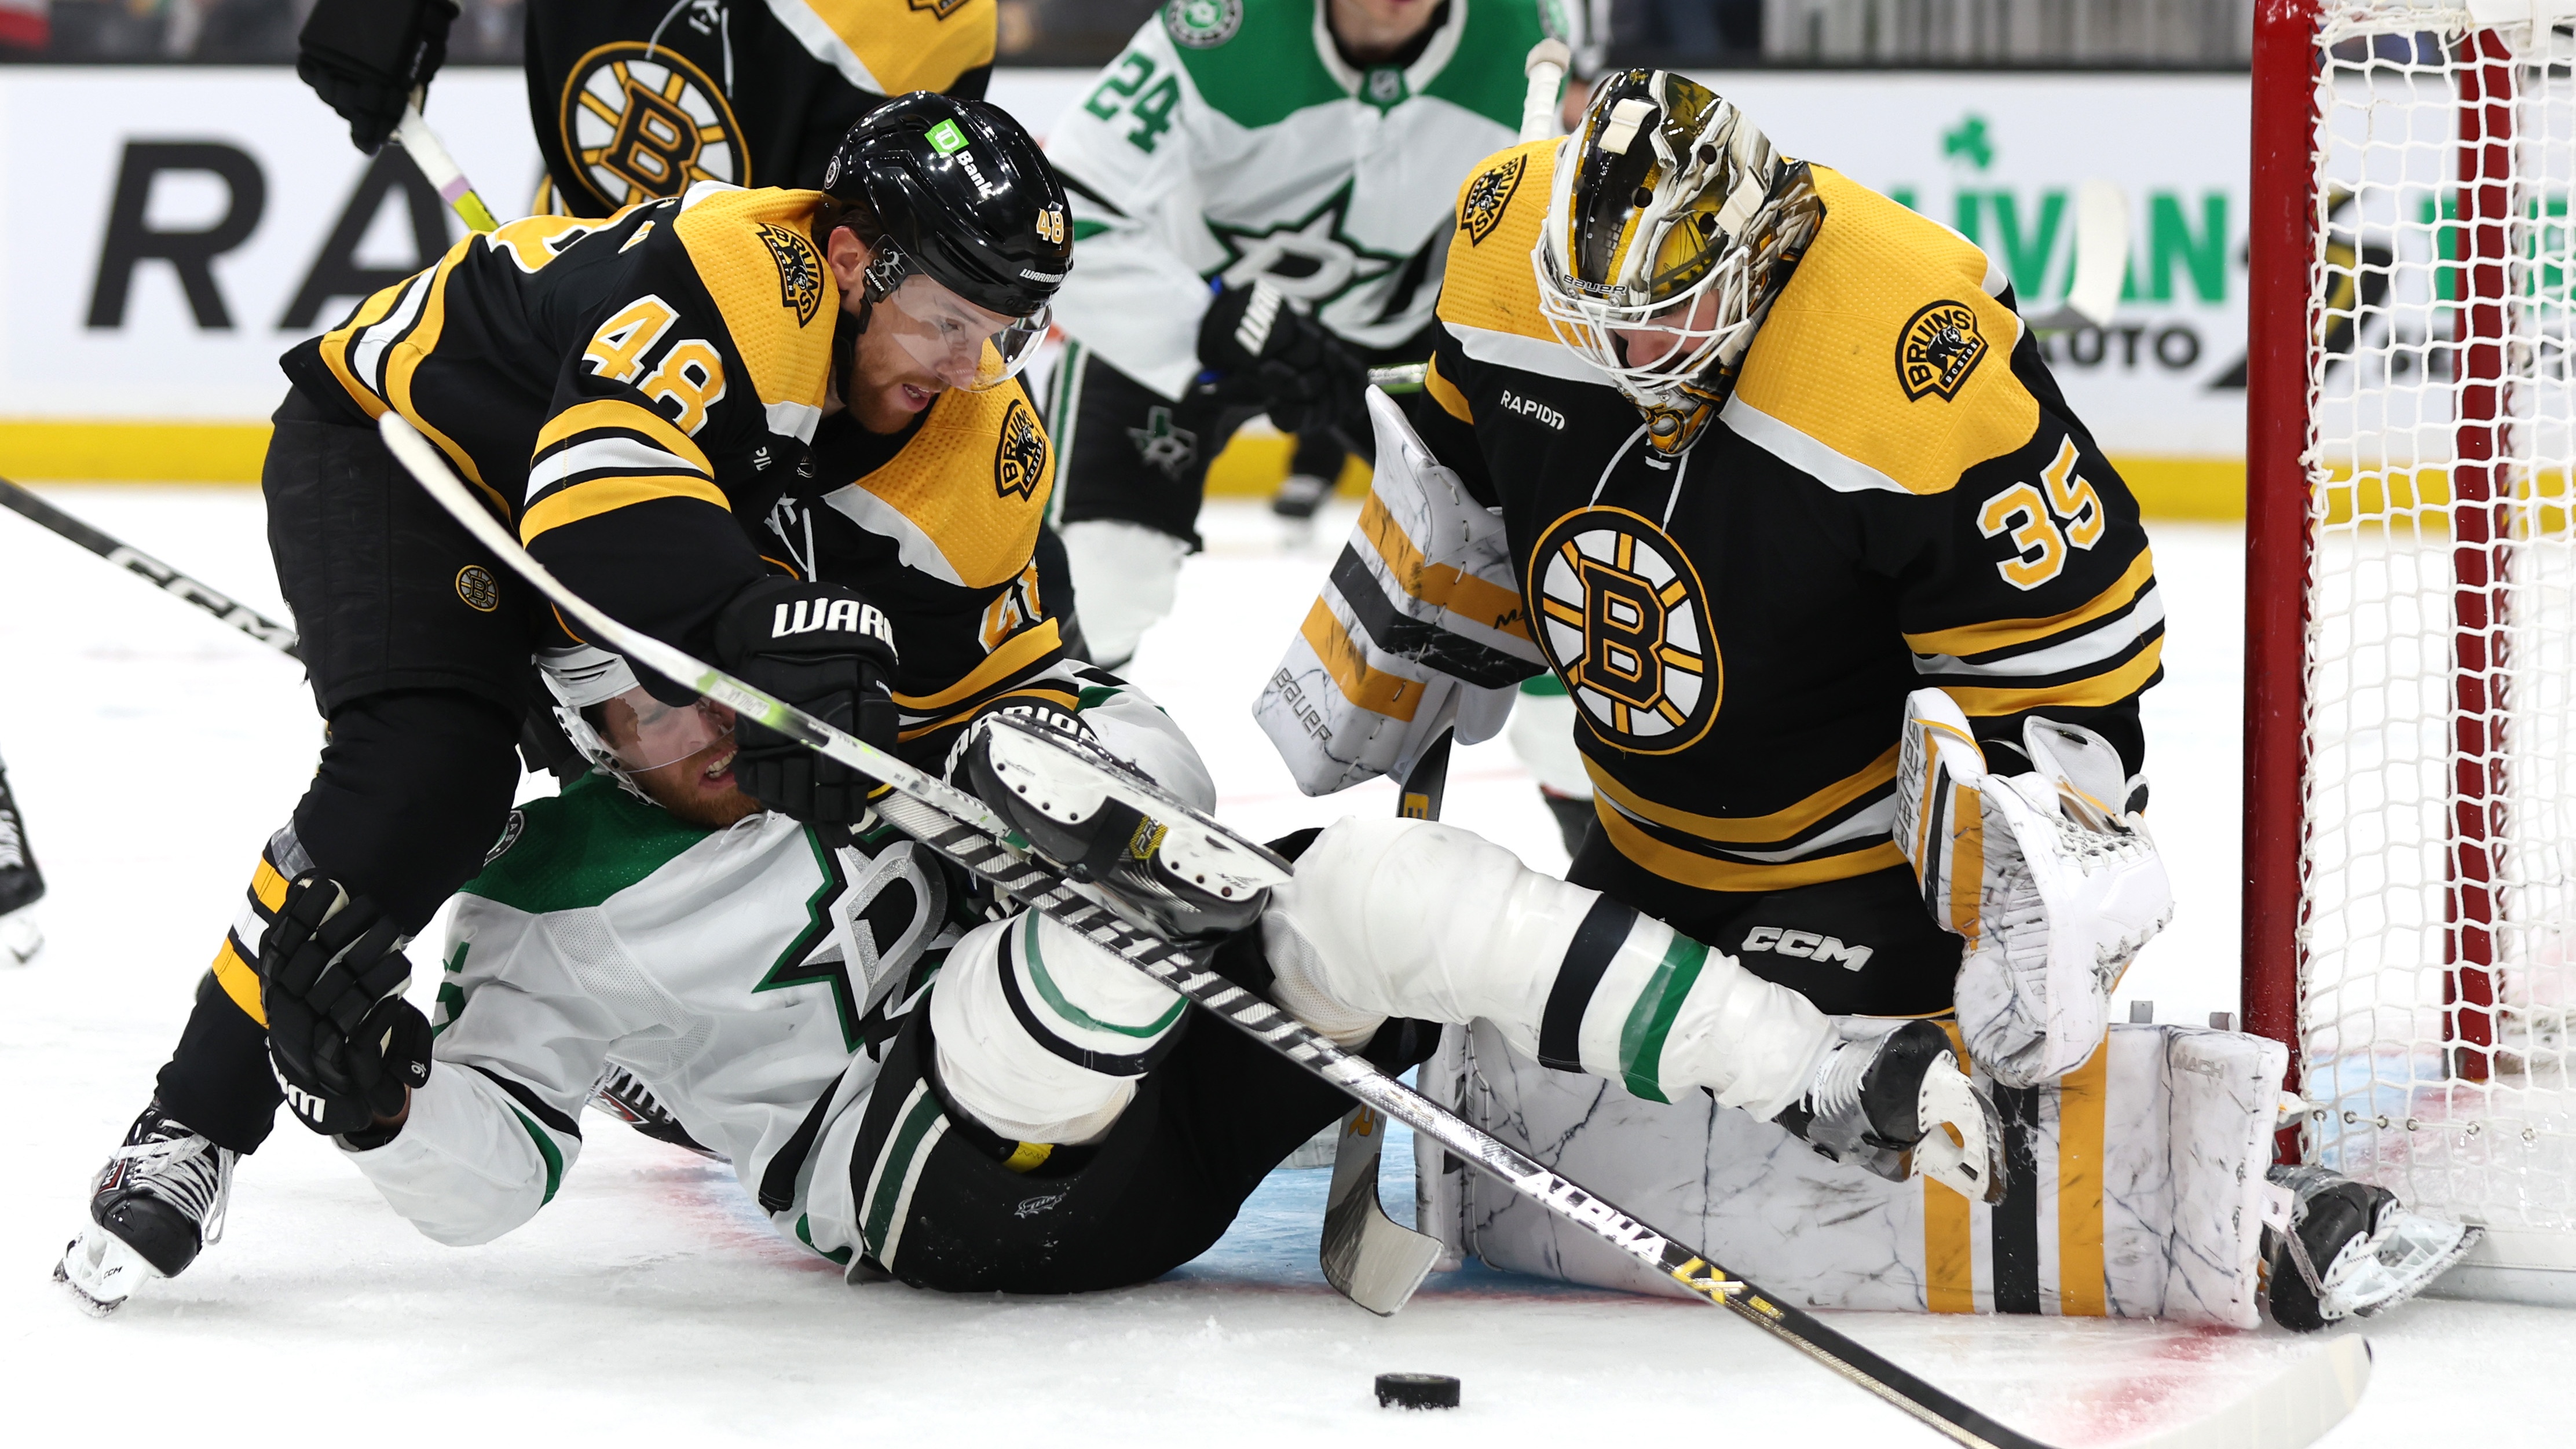 Stanley Cup playoffs live stream how to watch 2023 NHL Conference Finals free online from anywhere TechRadar